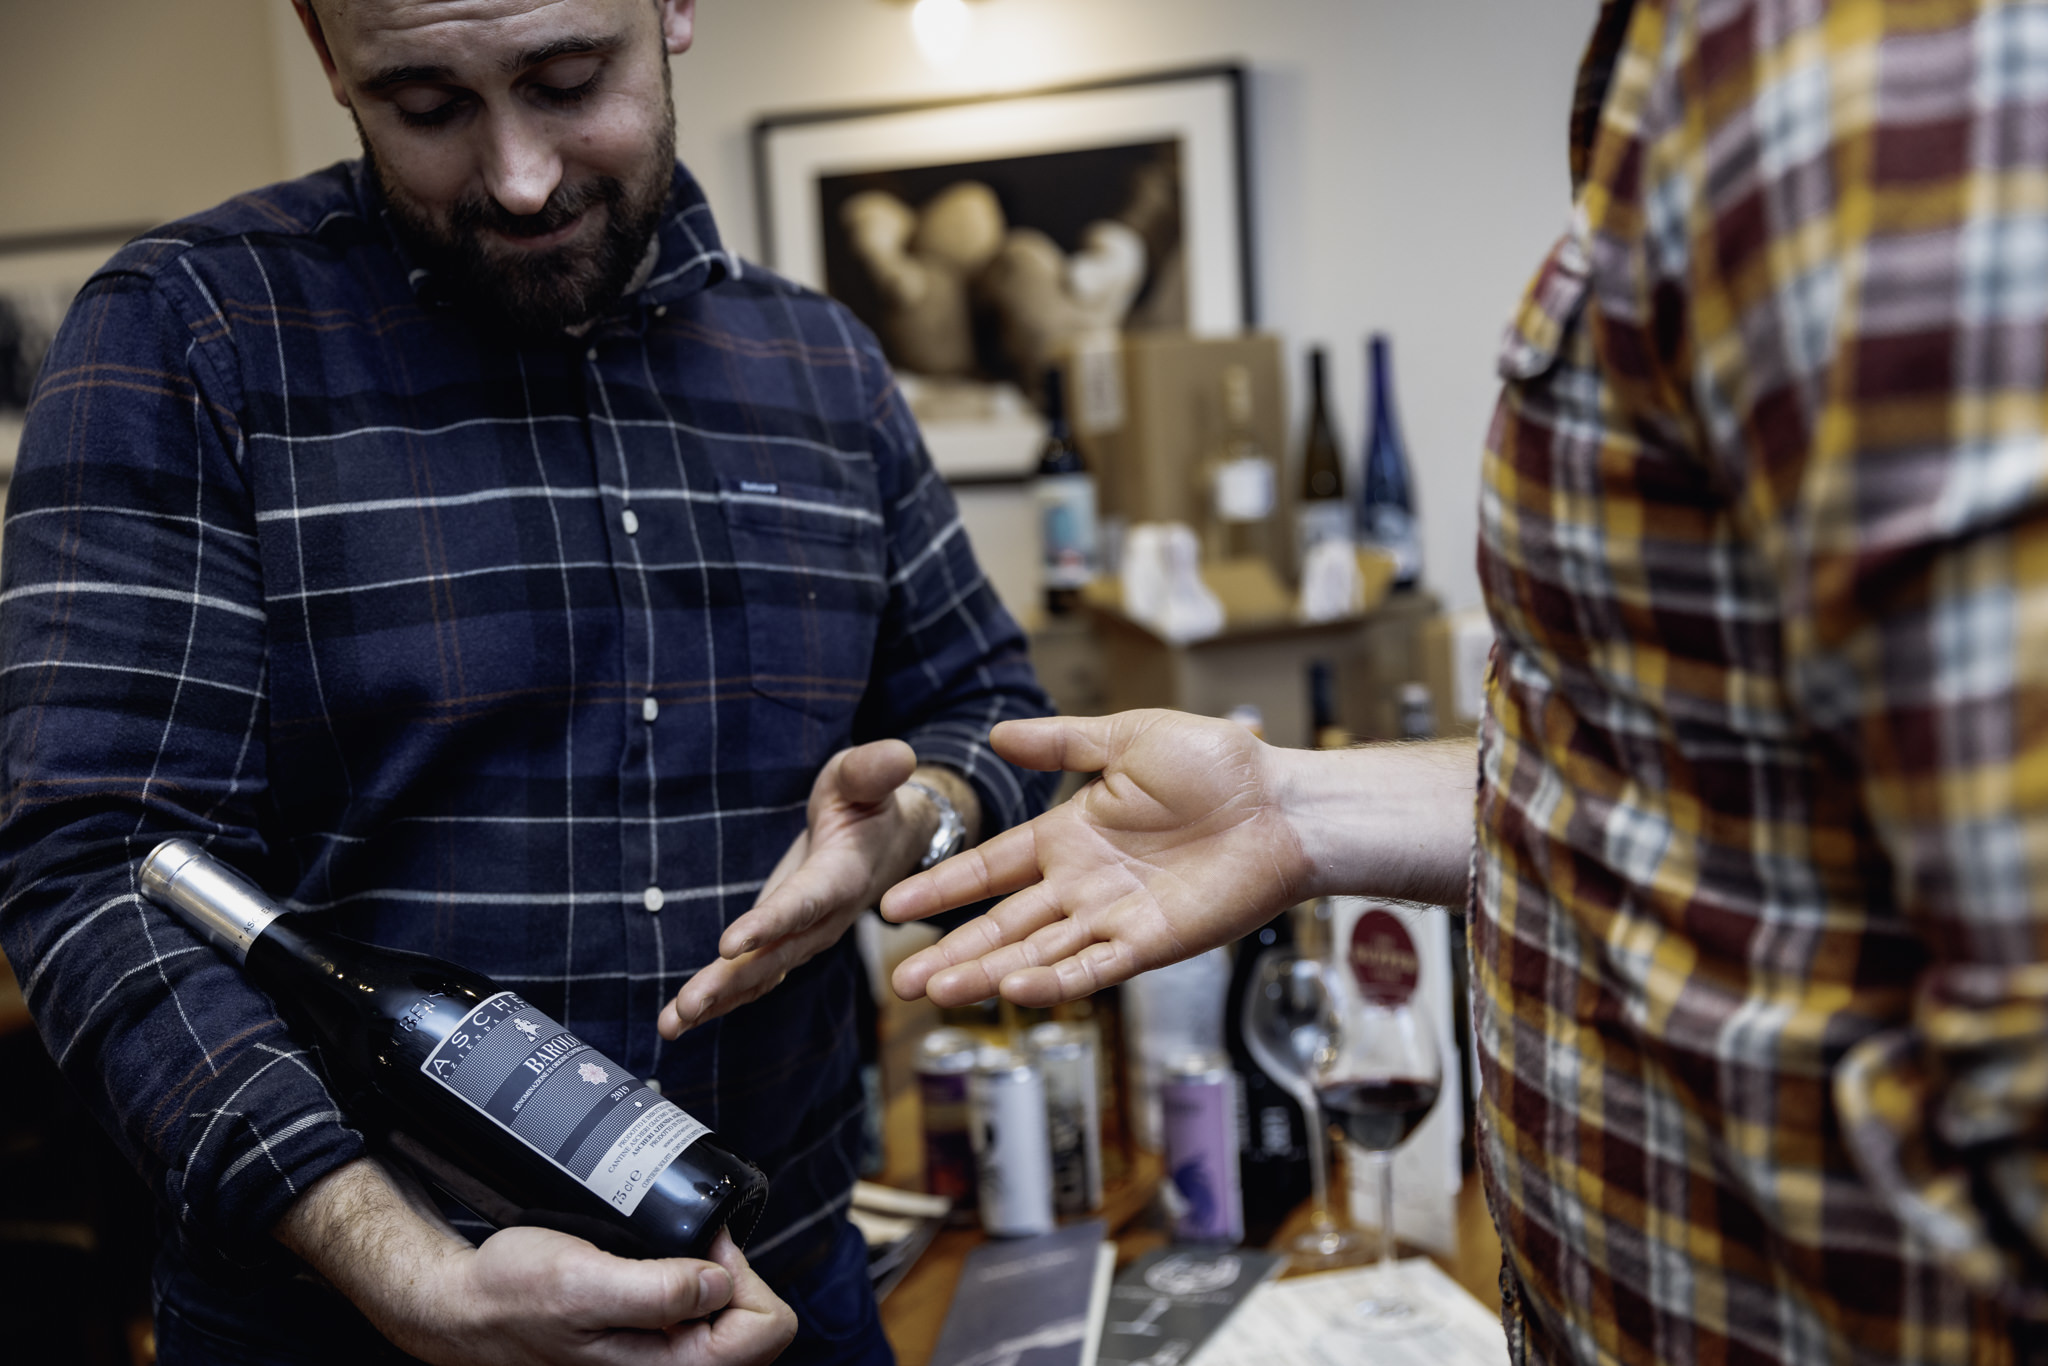 A pair of men talk in a wine shop as one holds a bottle of red wine